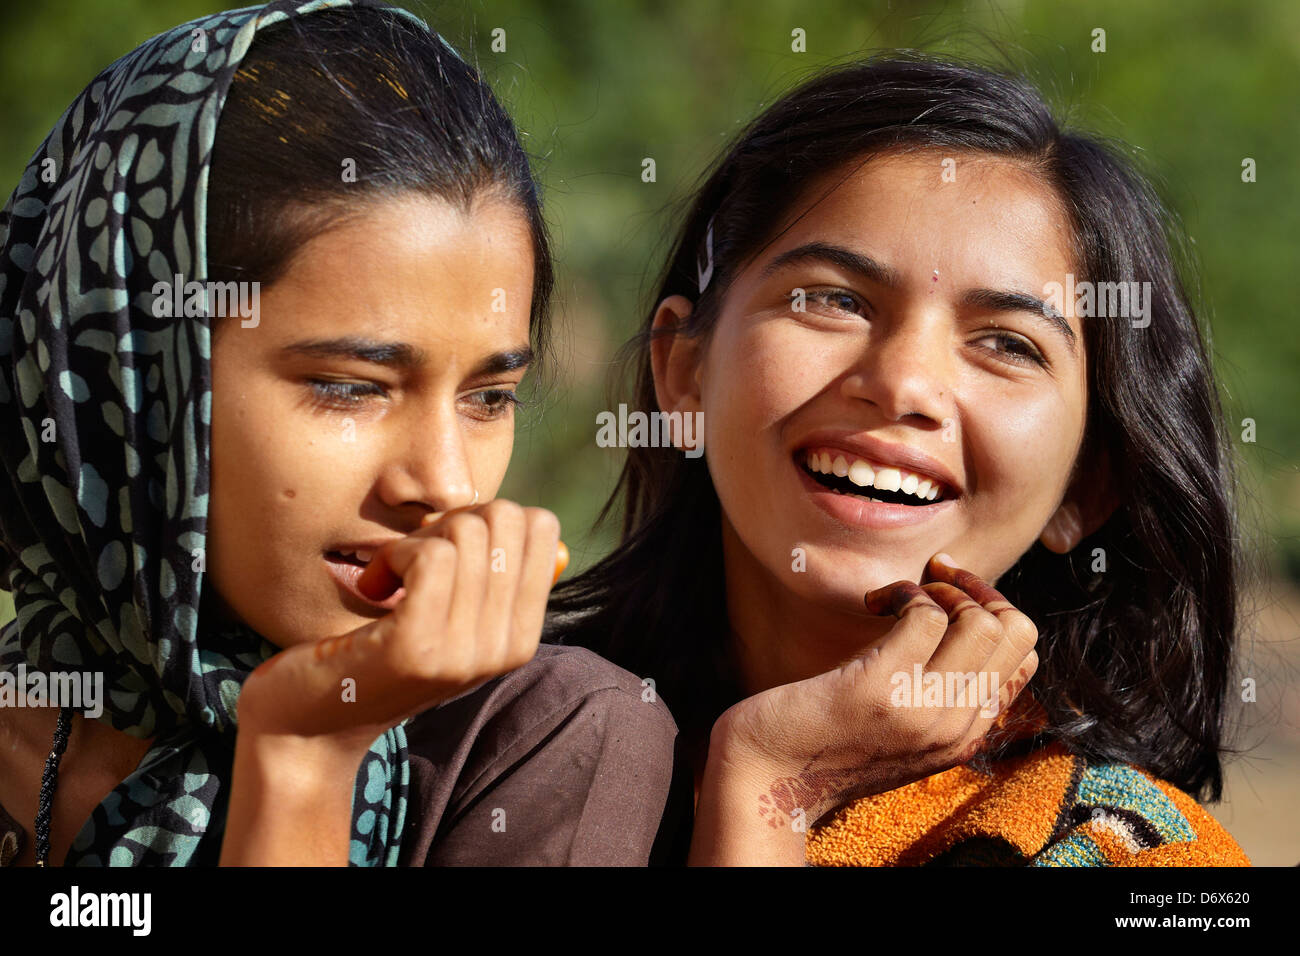 Portrait of young hindu smiling girls, Rajasthan State, India Stock Photo